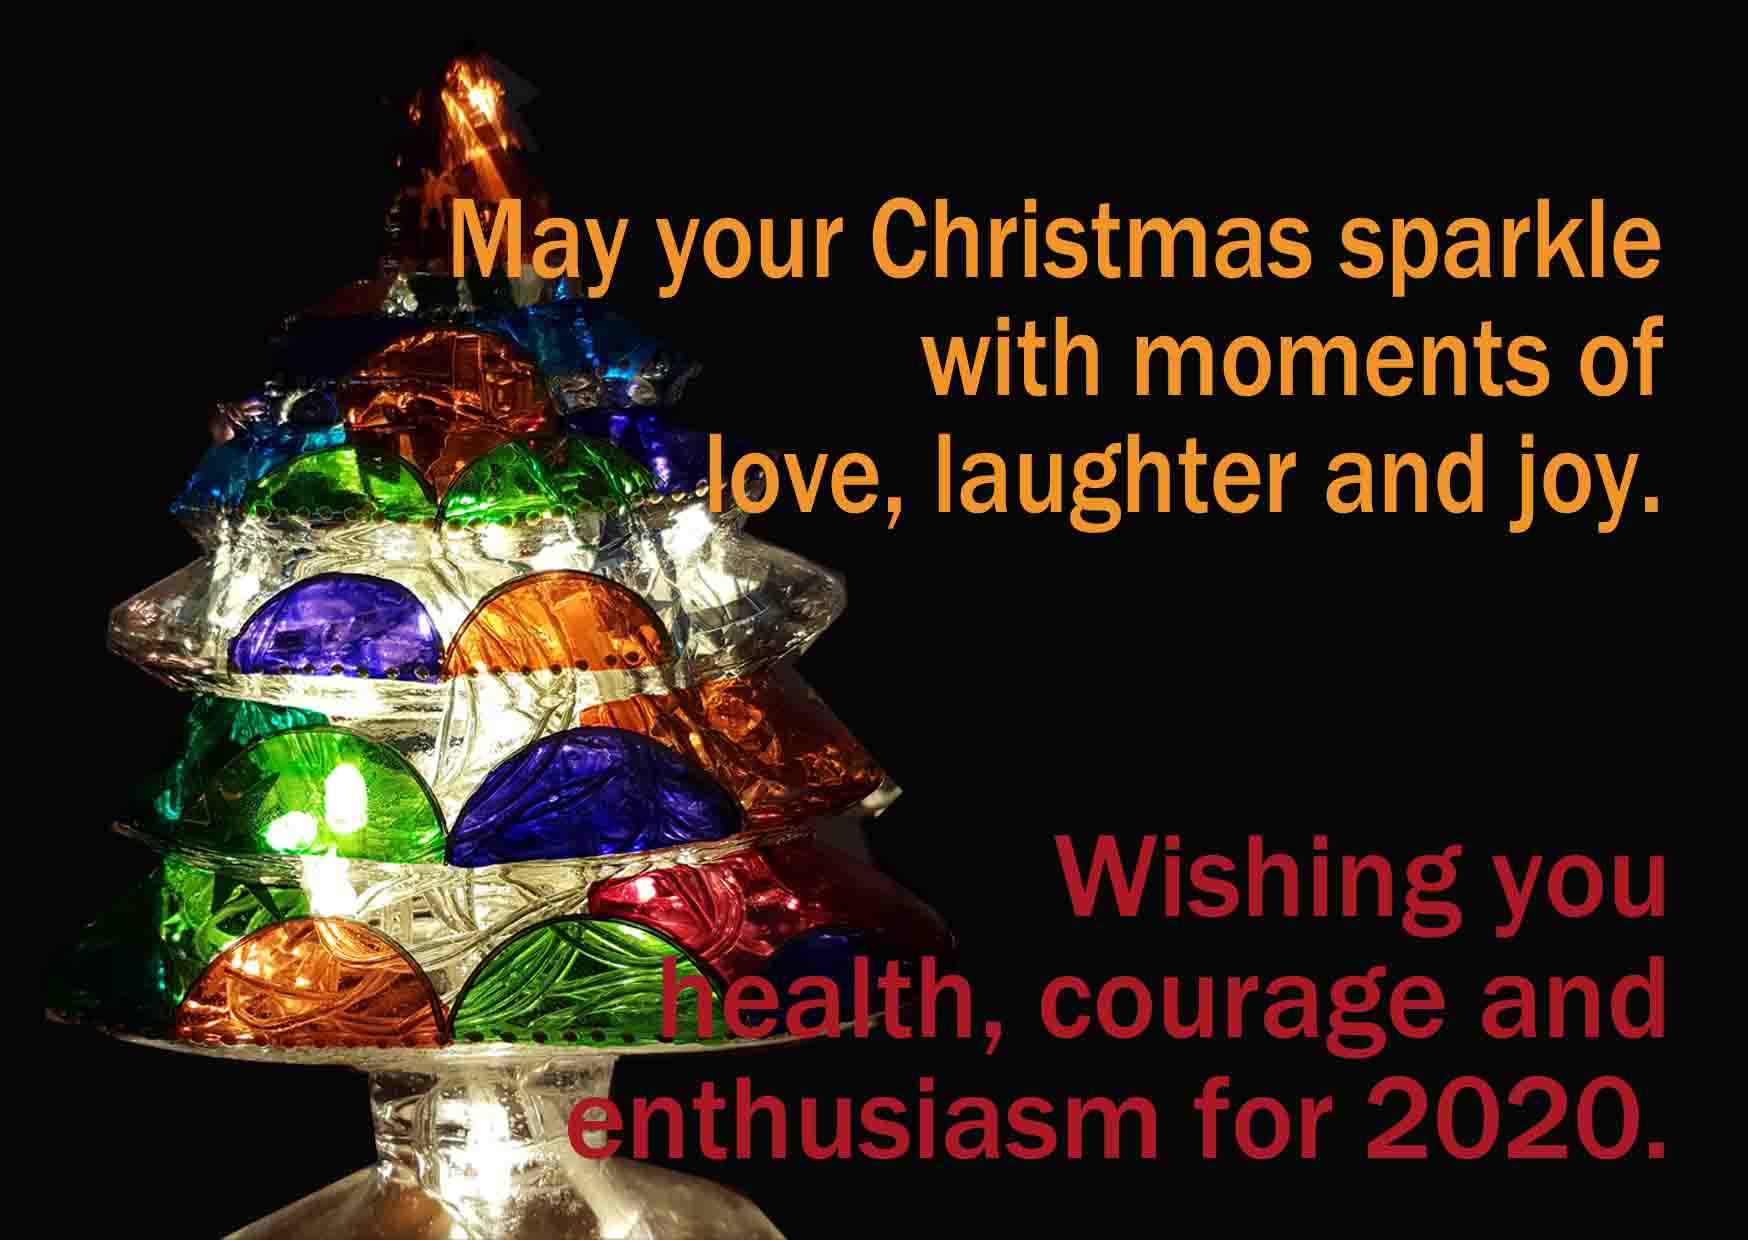 May your Christmas sparkle with moments of love, laughter and joy.